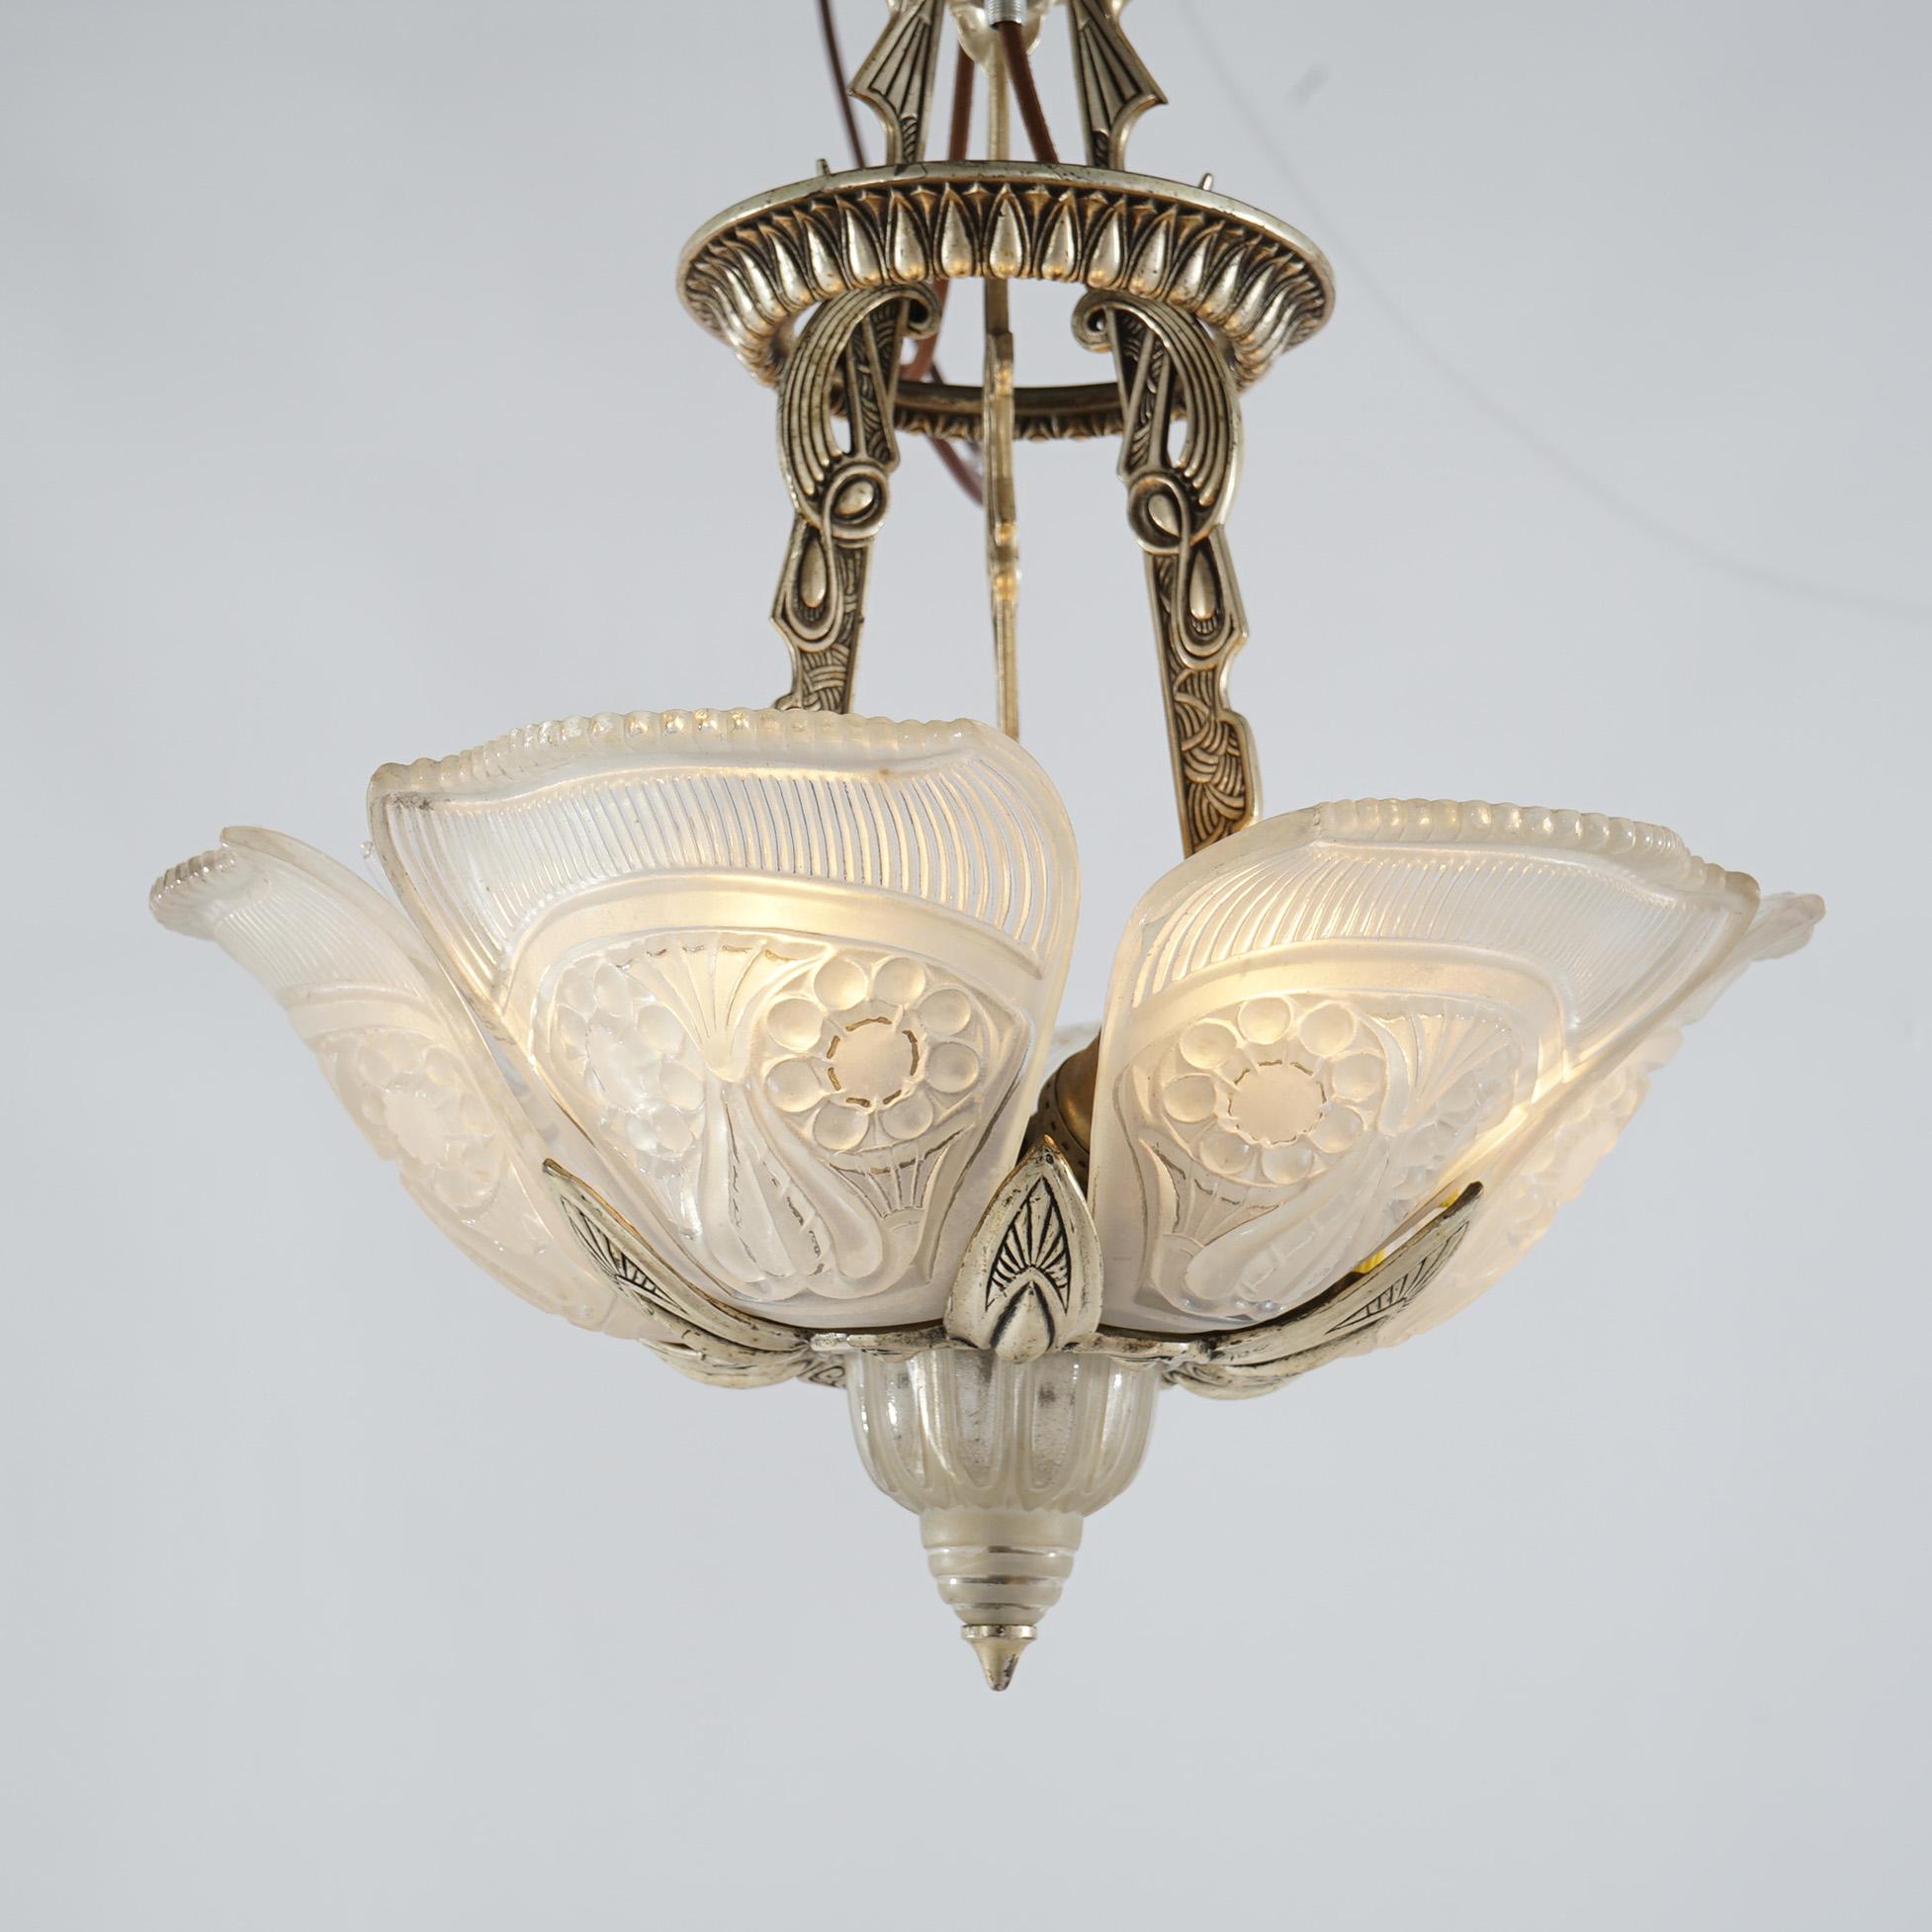 Antique Art Deco Slip Shade Hanging Light with Opalescent Pressed Glass Shades 1